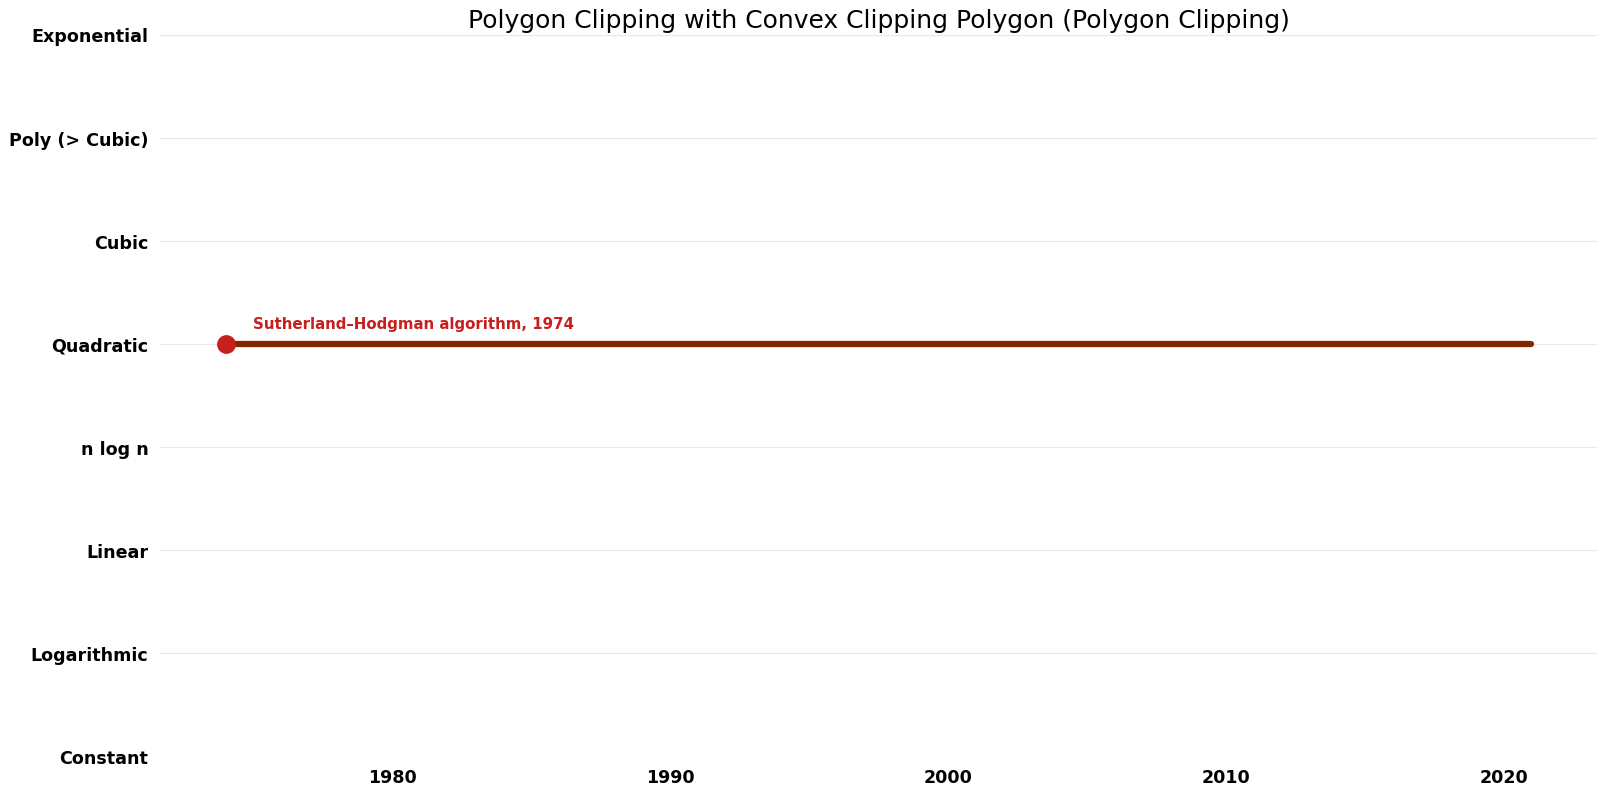 Polygon Clipping - Polygon Clipping with Convex Clipping Polygon - Time.png